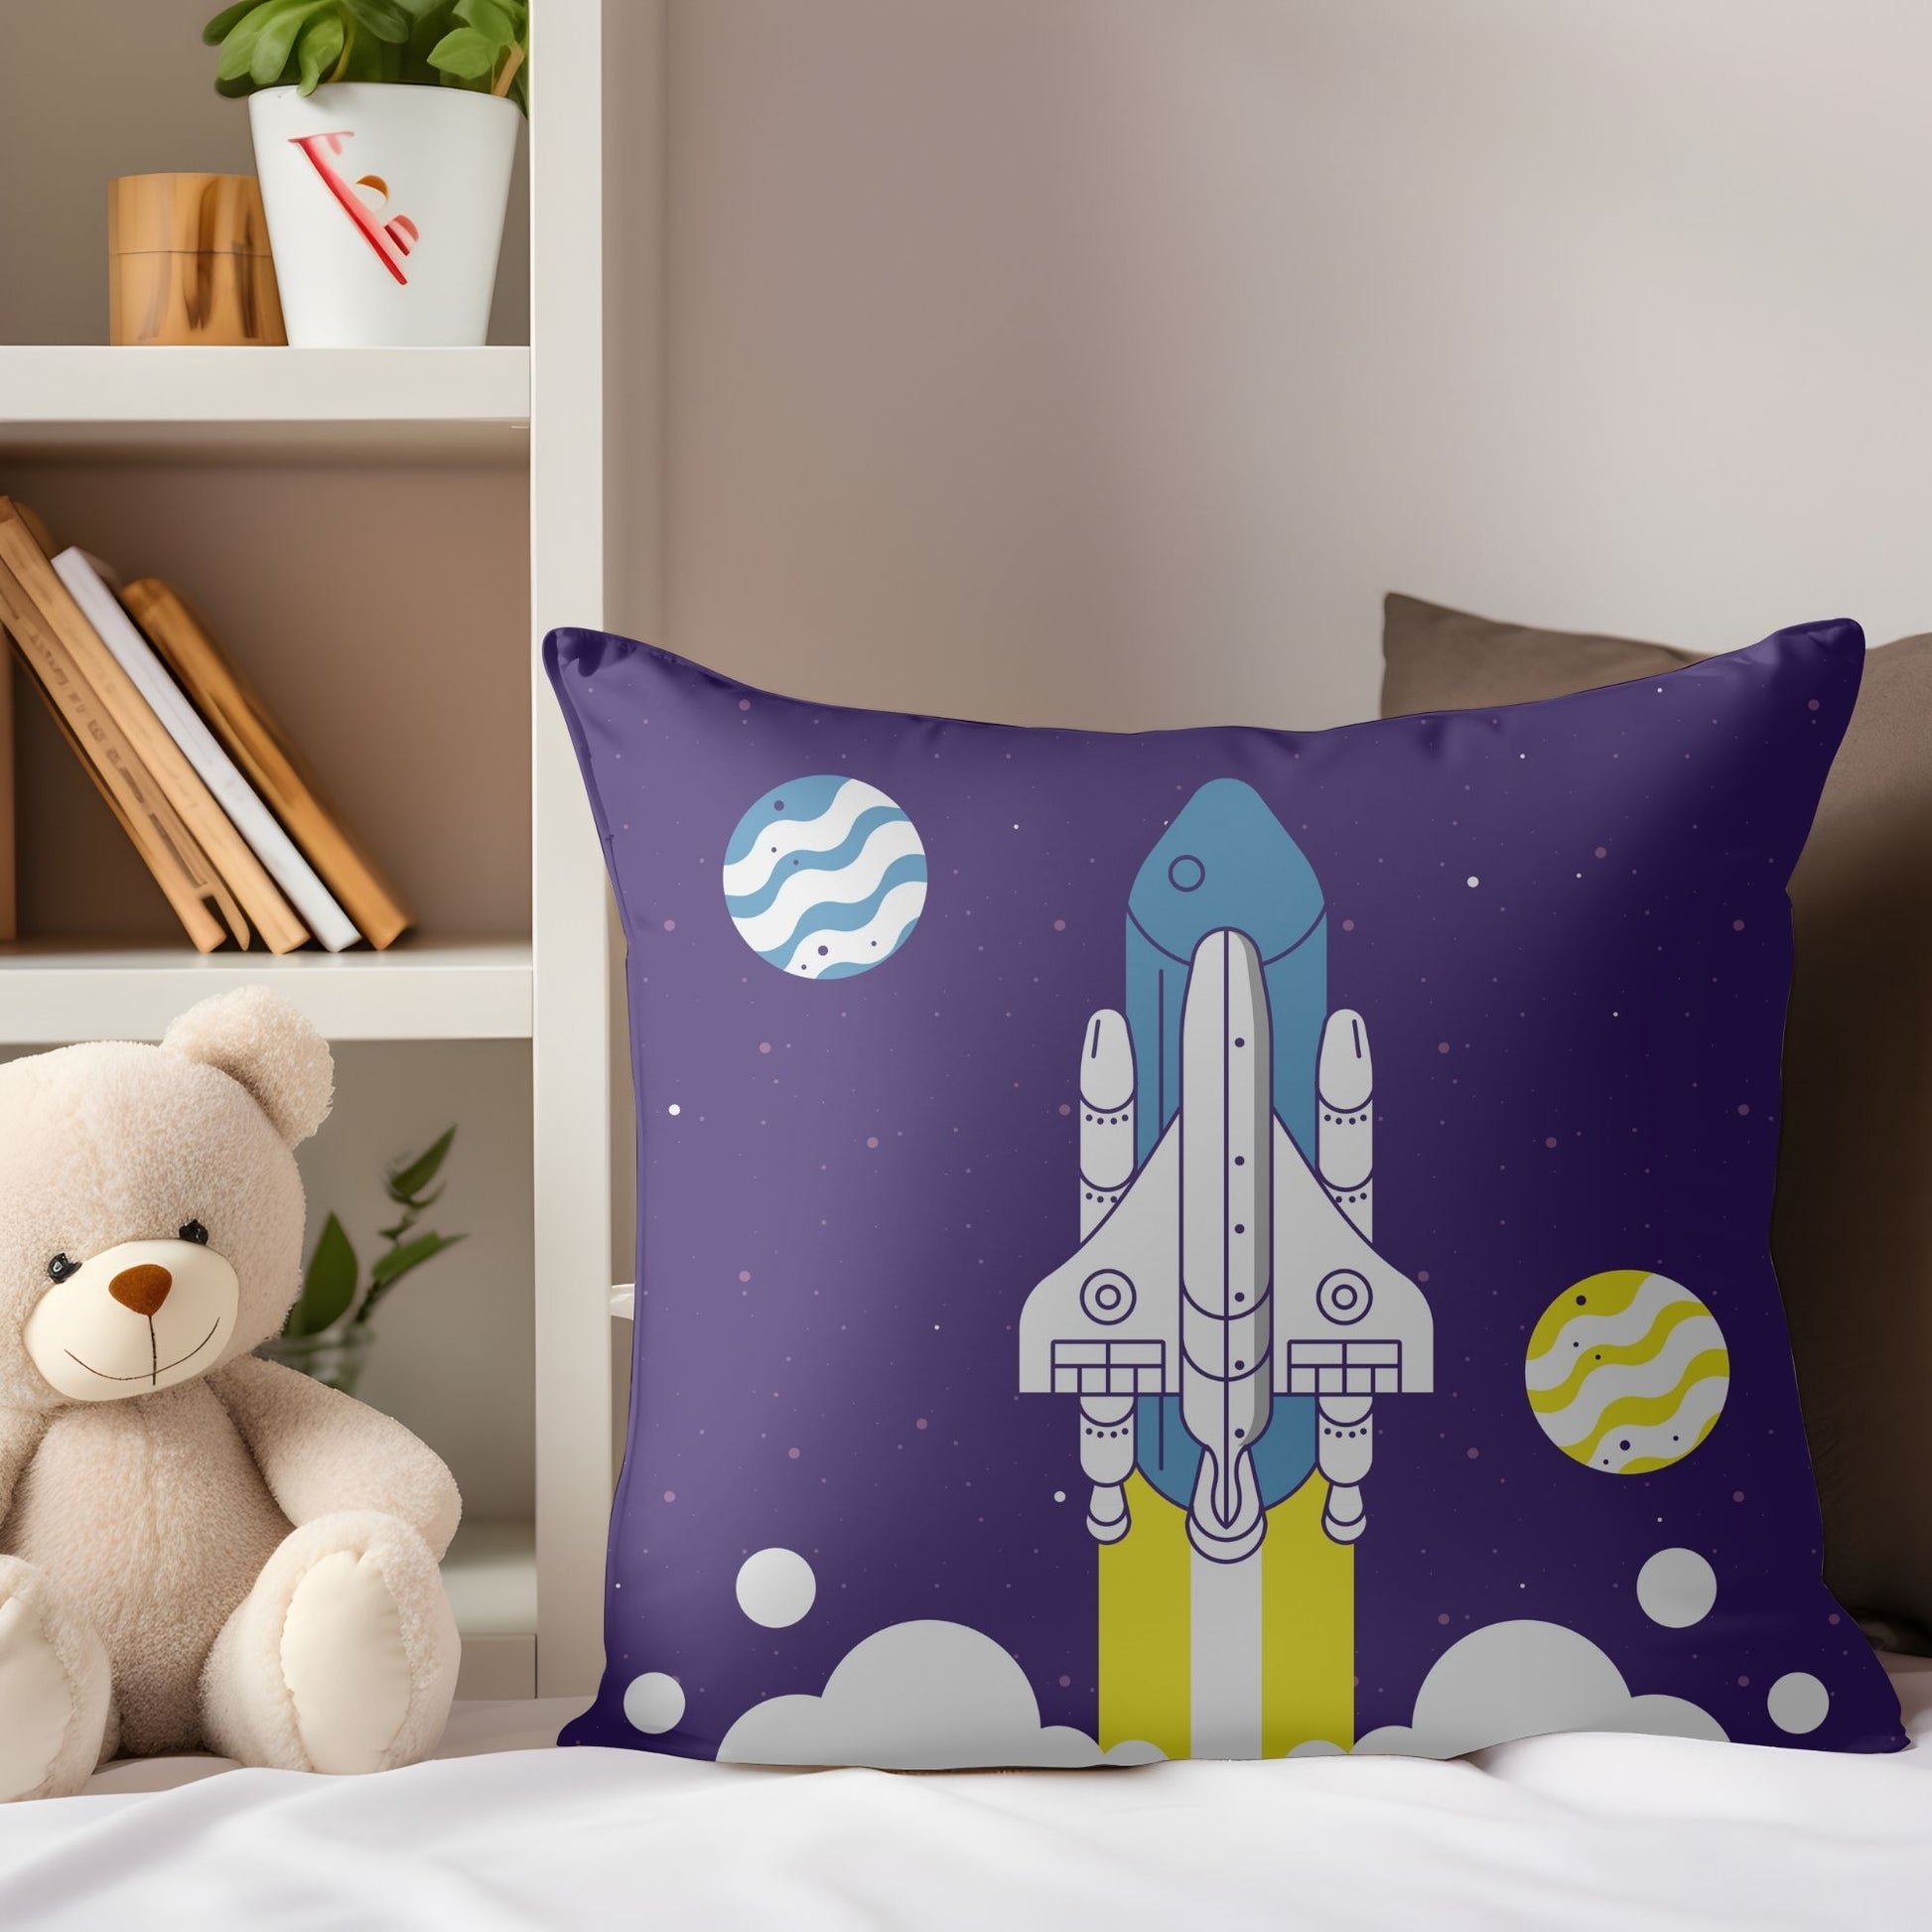 Kids pillow featuring a space rocket takeoff for out-of-this-world dreams.